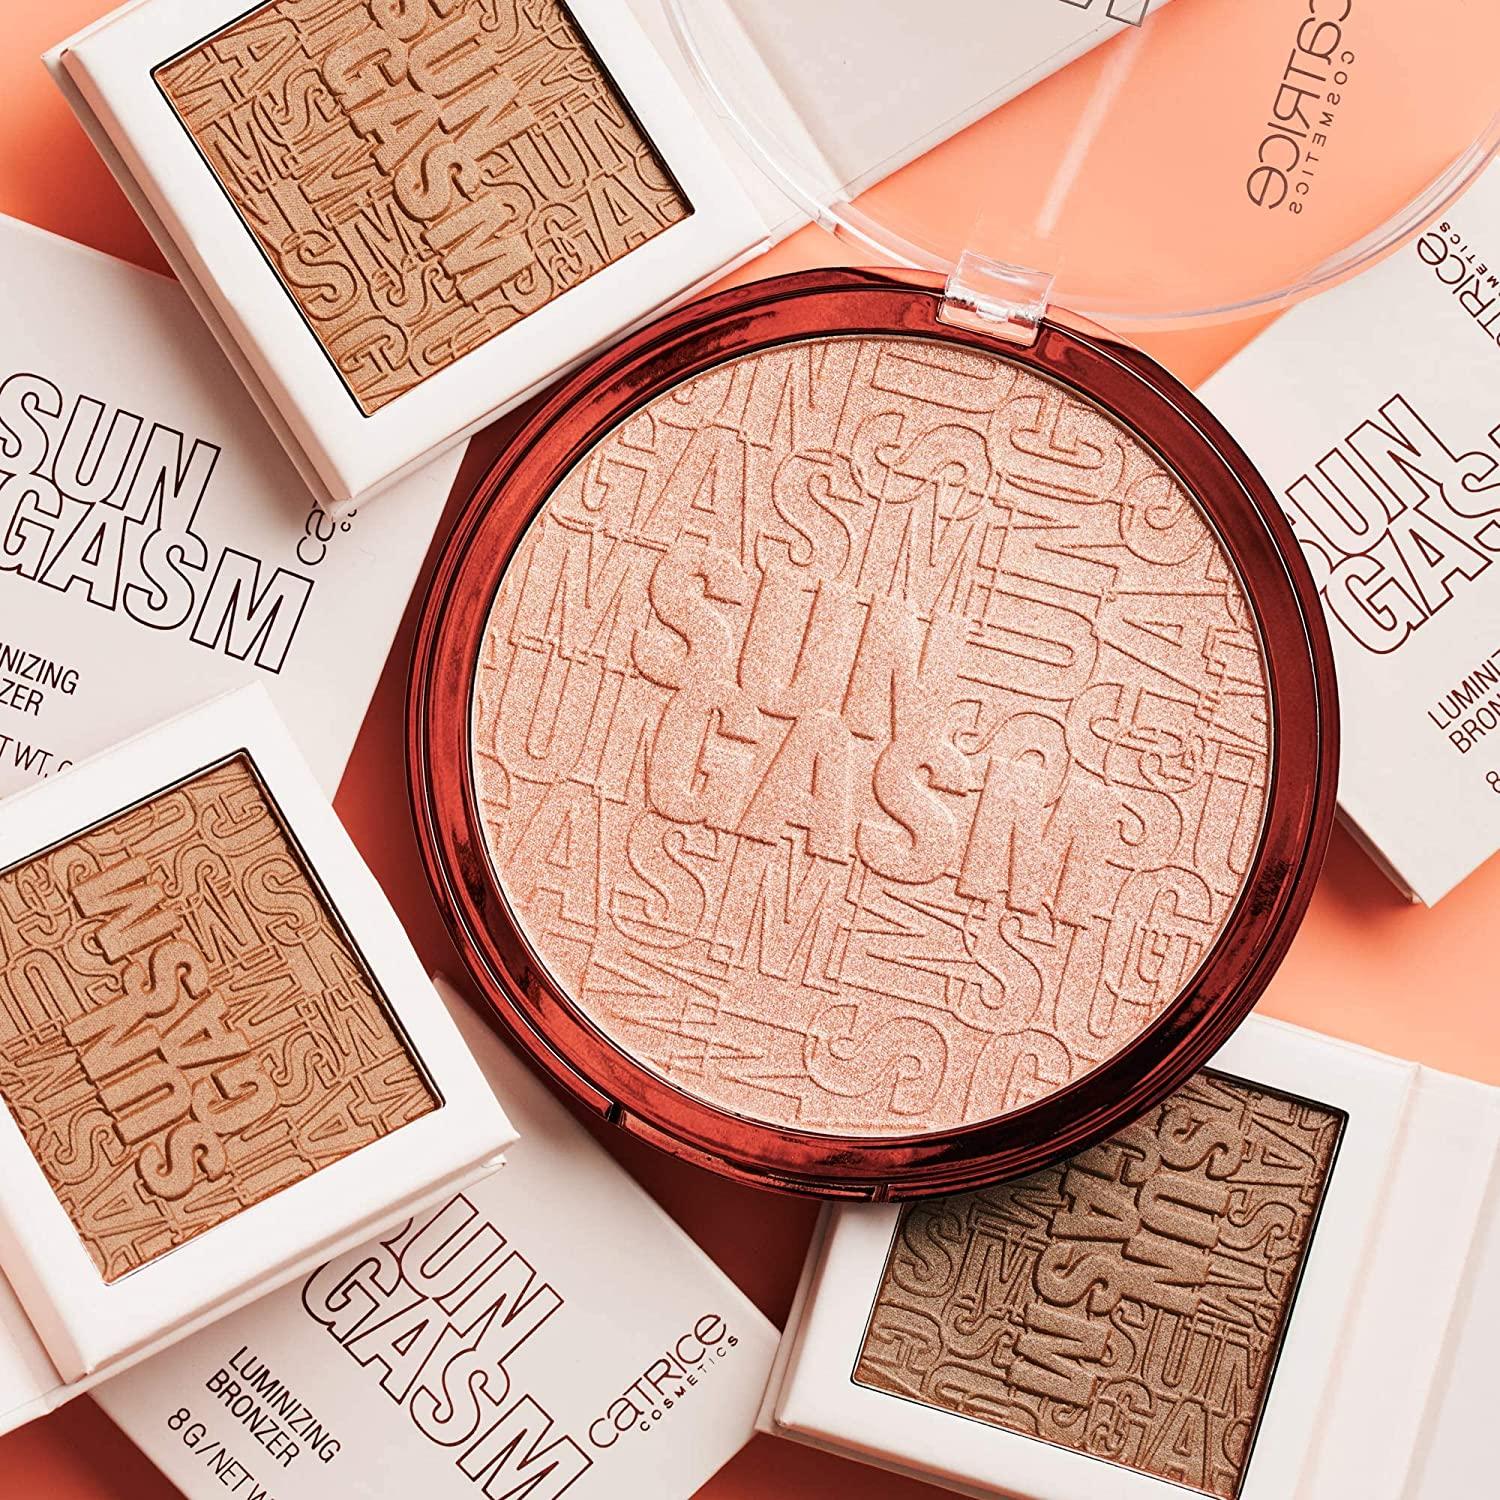 With Paraben SUNGASM Catrice Silky Free Cruelty Skintones | Free Powder & Free, Body | For Sized, Vegan, Reflecting | Face Soft Light All Oil | Jumbo Highlighter | Pigments